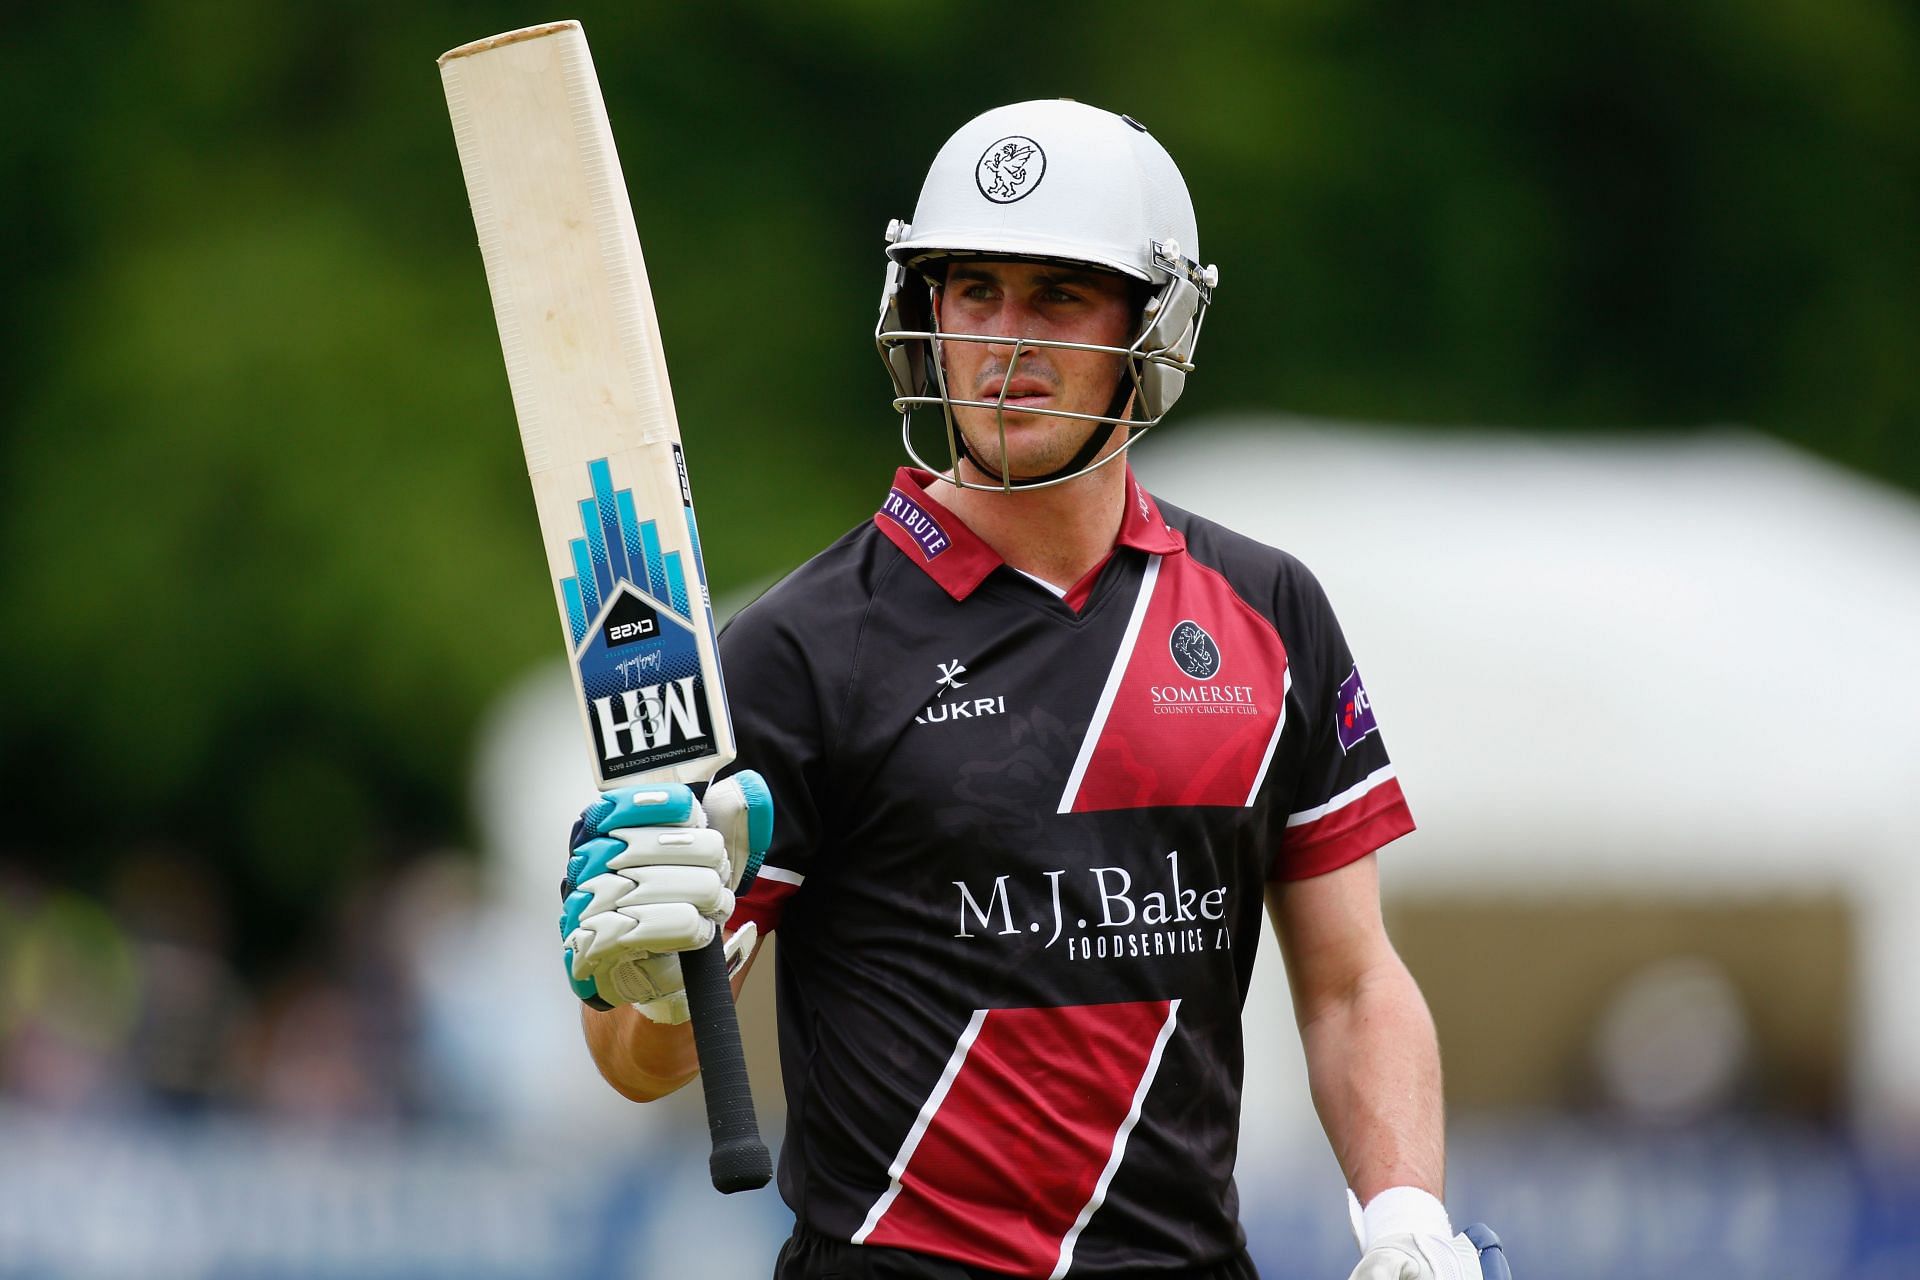 Craig Kieswetter played for England in the 2010 edition of the mega event (Image: Getty)